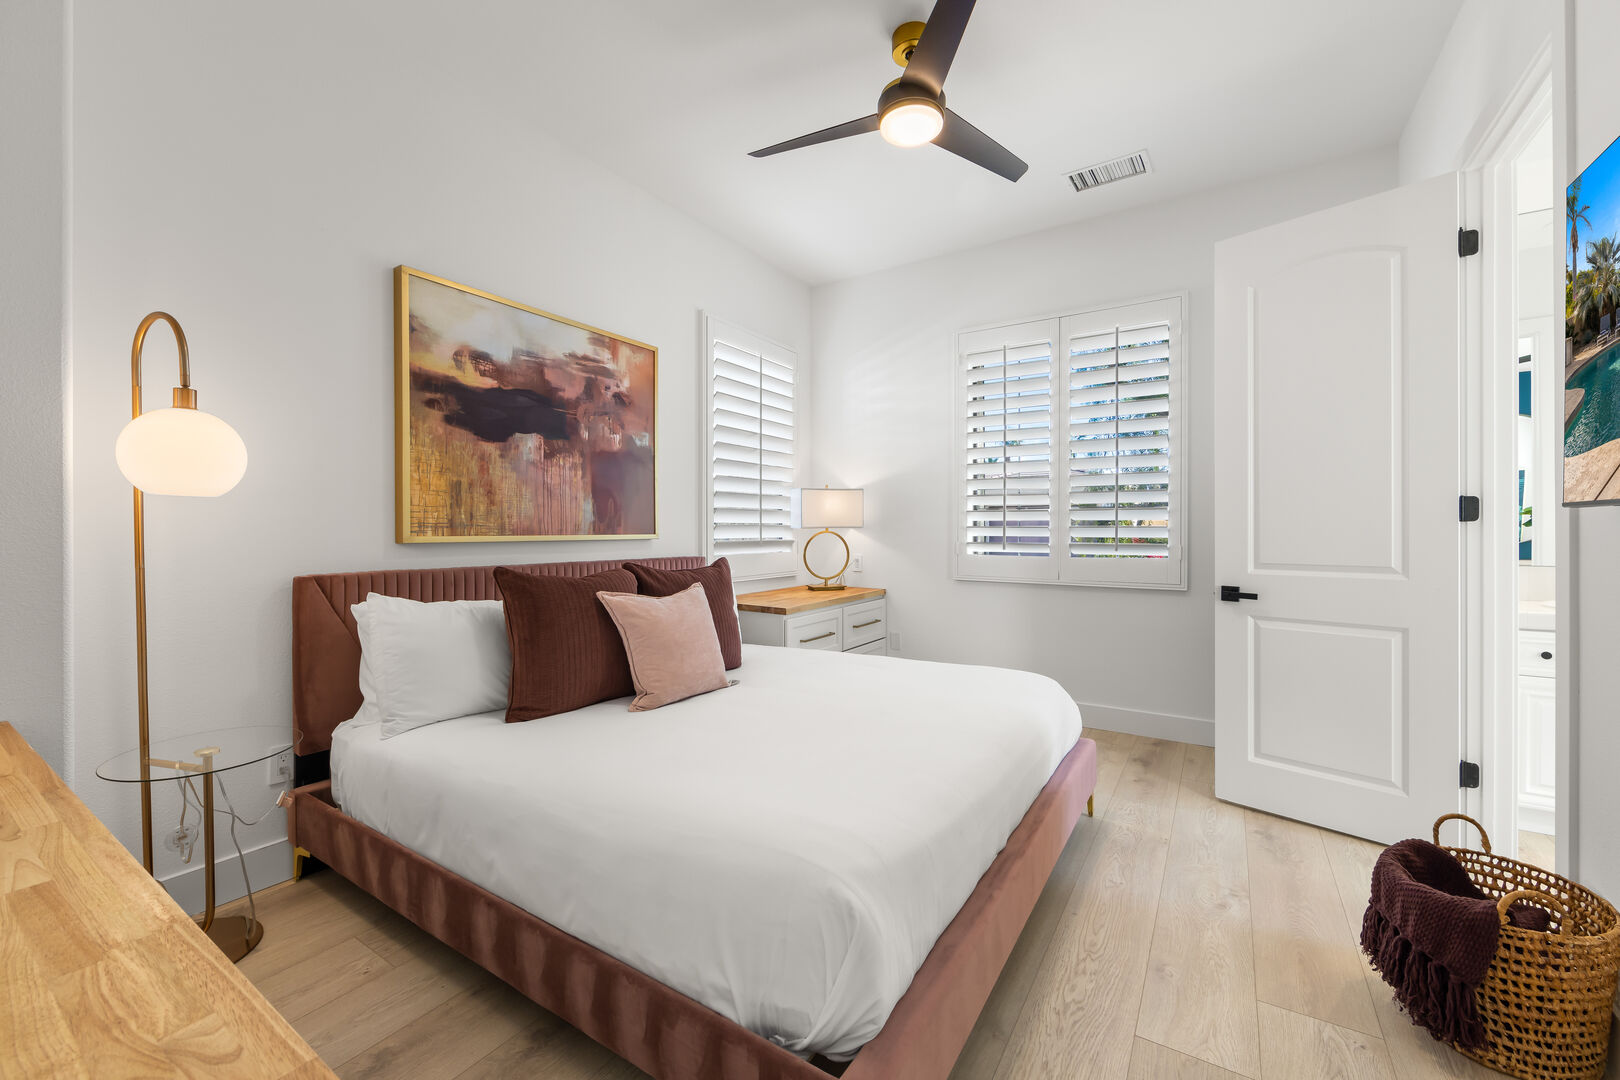 Jack and Jill Bedroom 2 is located next to the front entrance doors and features a King-sized Bed, a 55-inch Samsung 4K Smart television, a remote-controlled ceiling fan, and a floating dresser with wide, spacious drawers for all your storage needs.